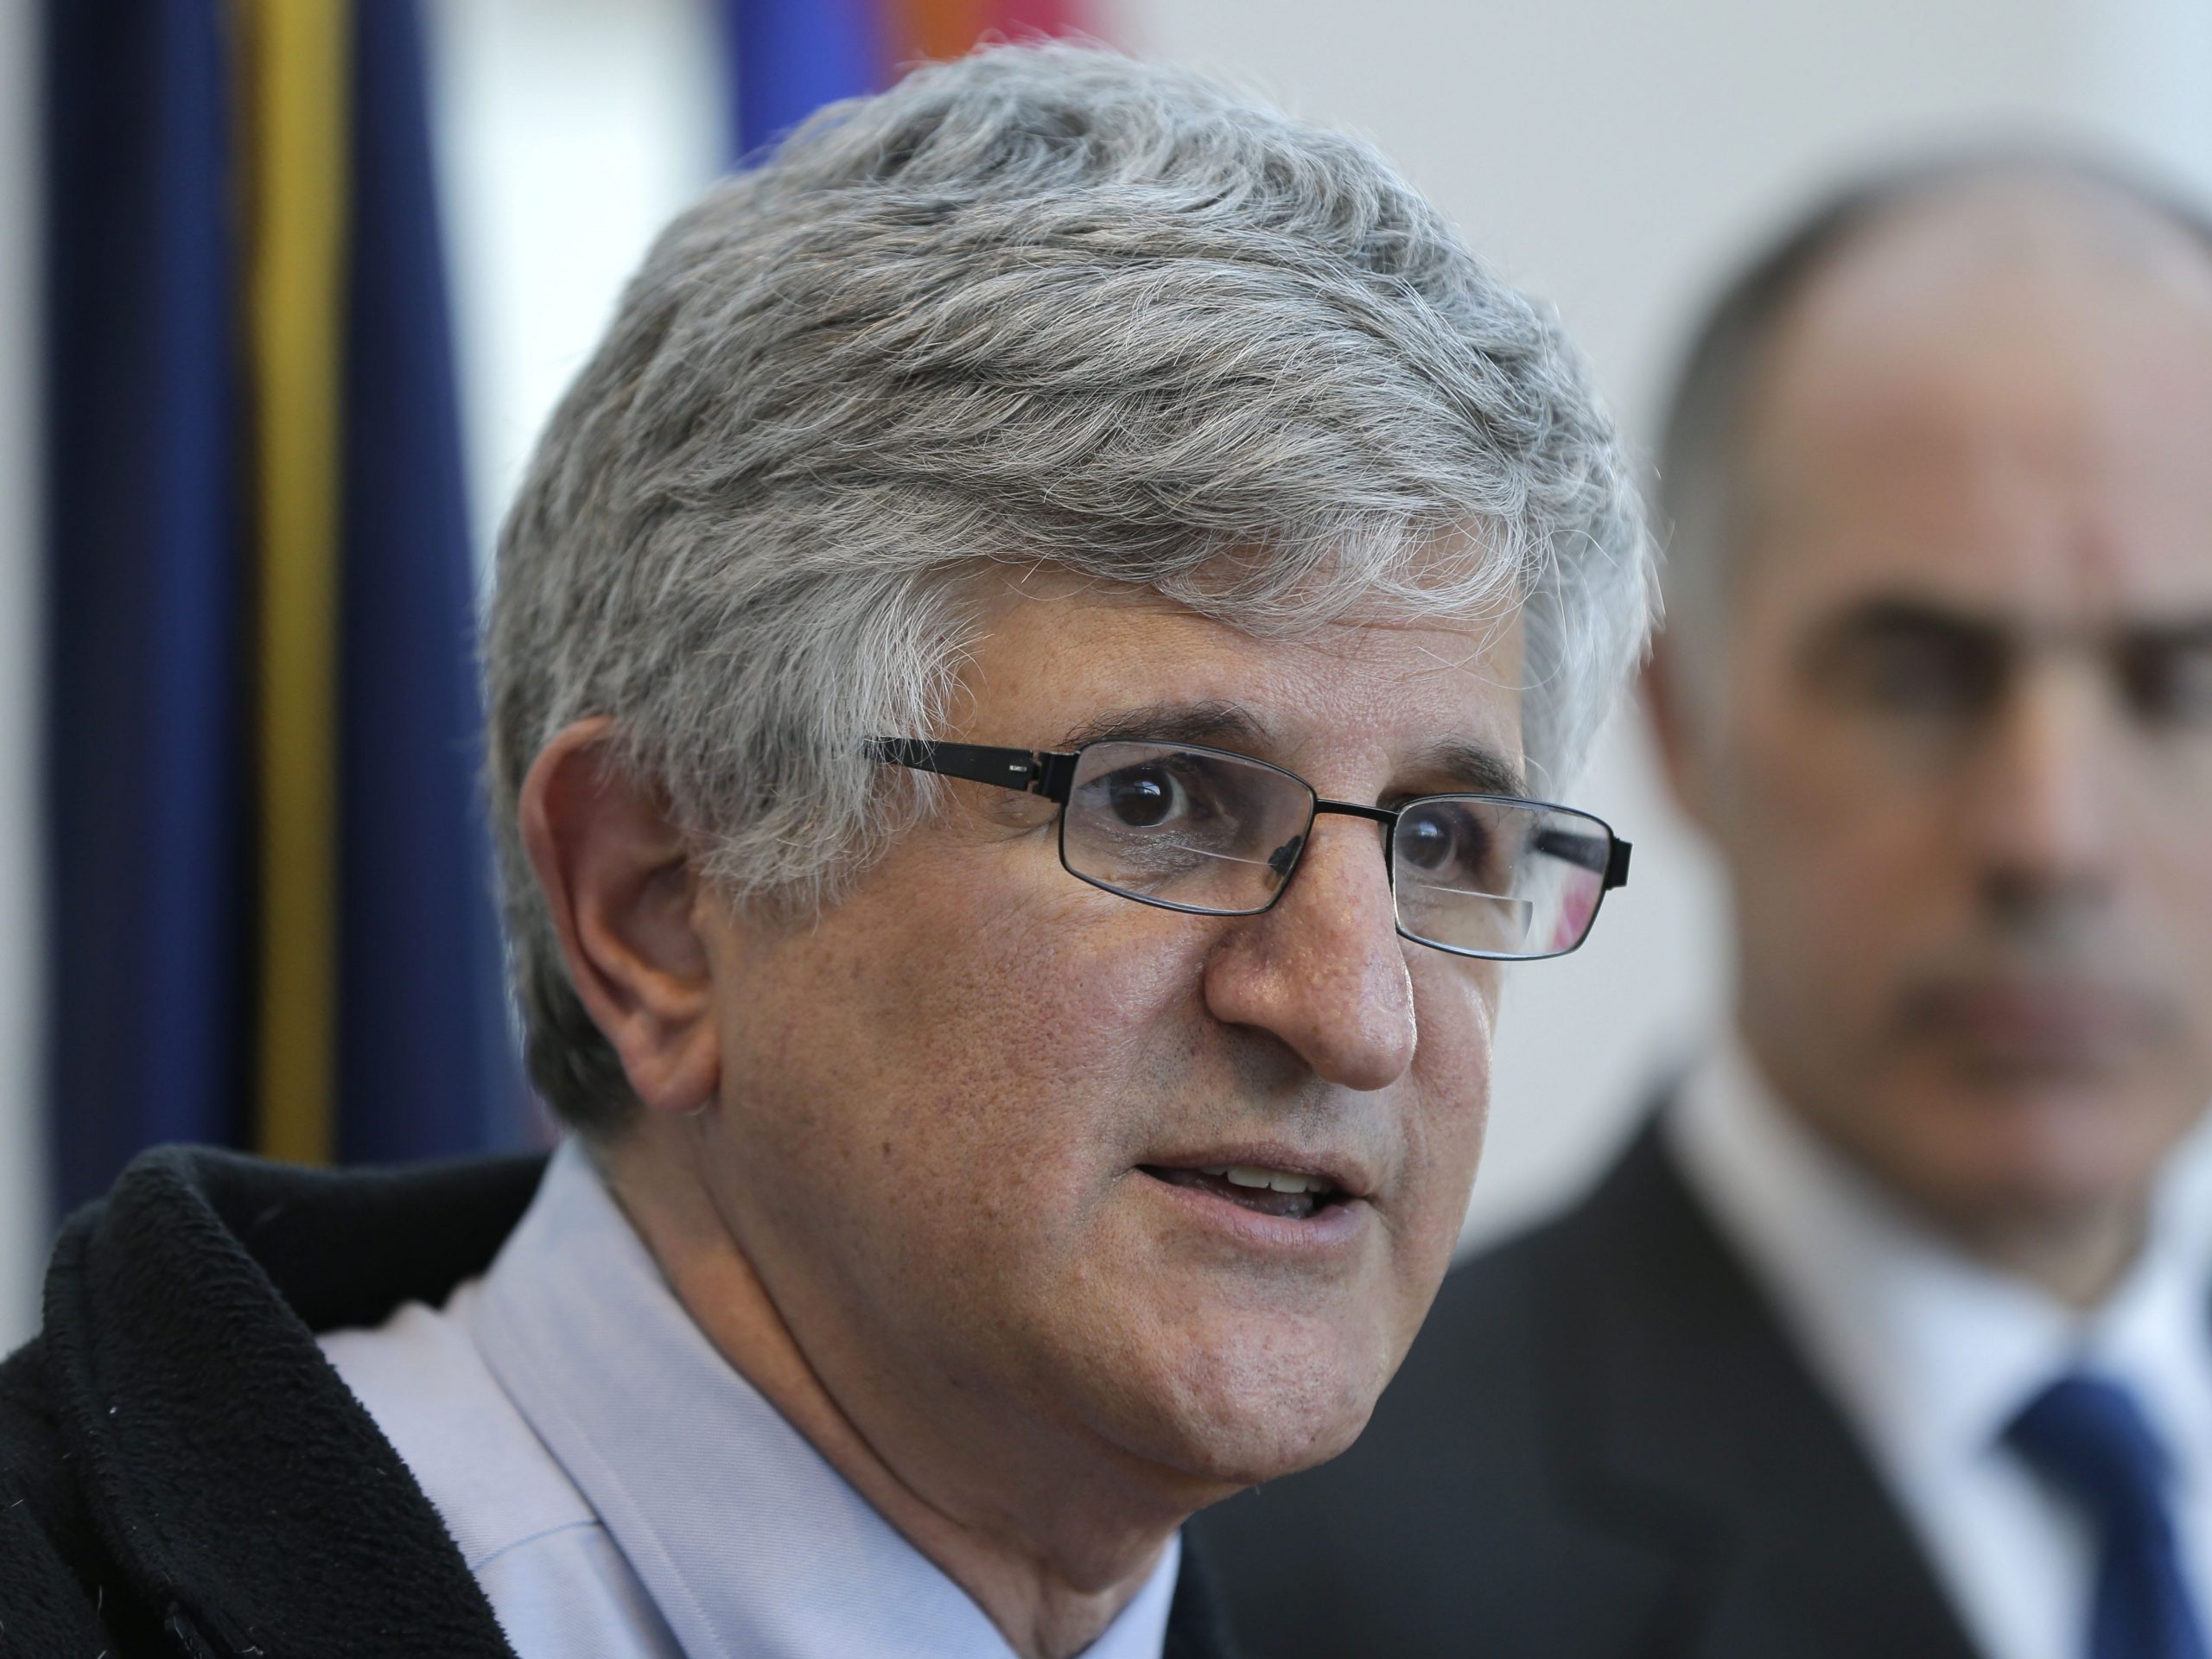 Dr. Paul A. Offit speaks at a press conference while Pennsylvania Sen. Bob Casey Jr. looks on